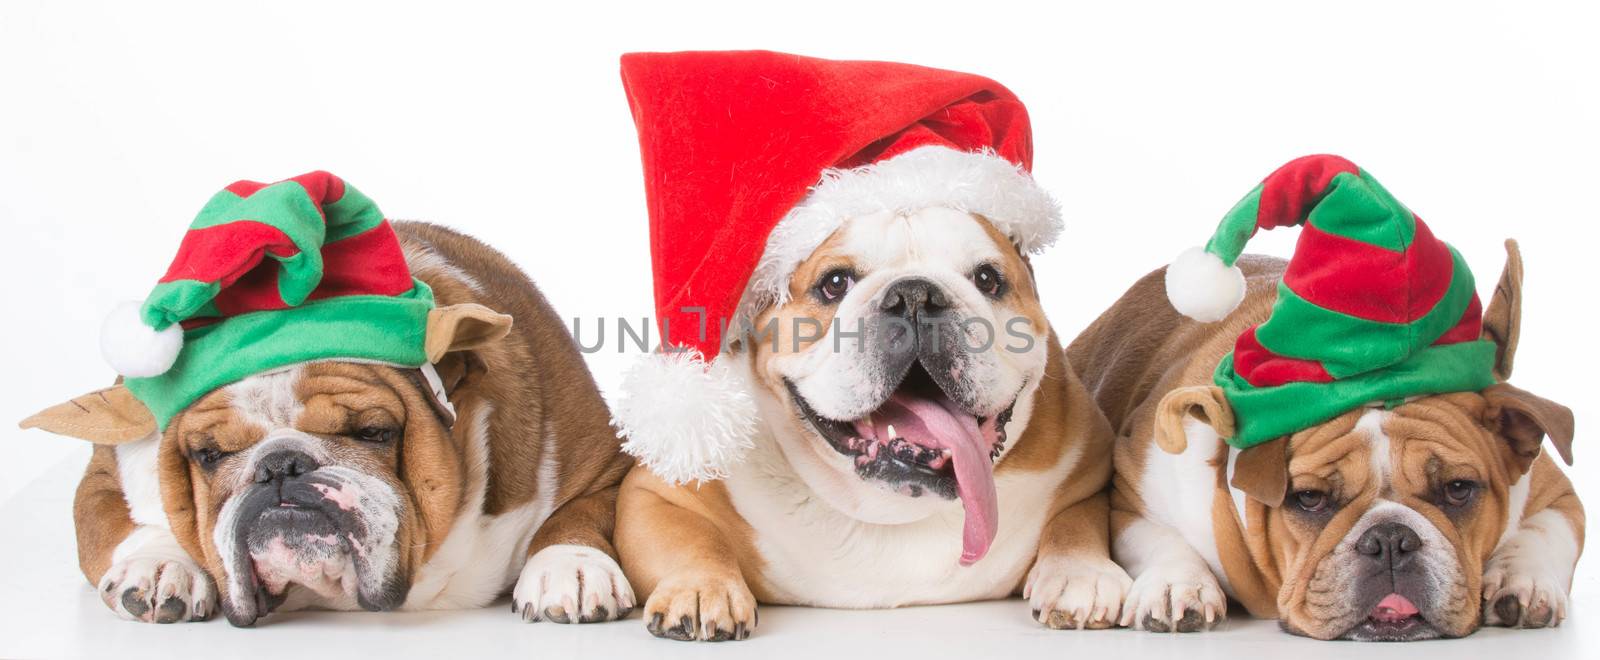 three dogs dressed for christmas by willeecole123